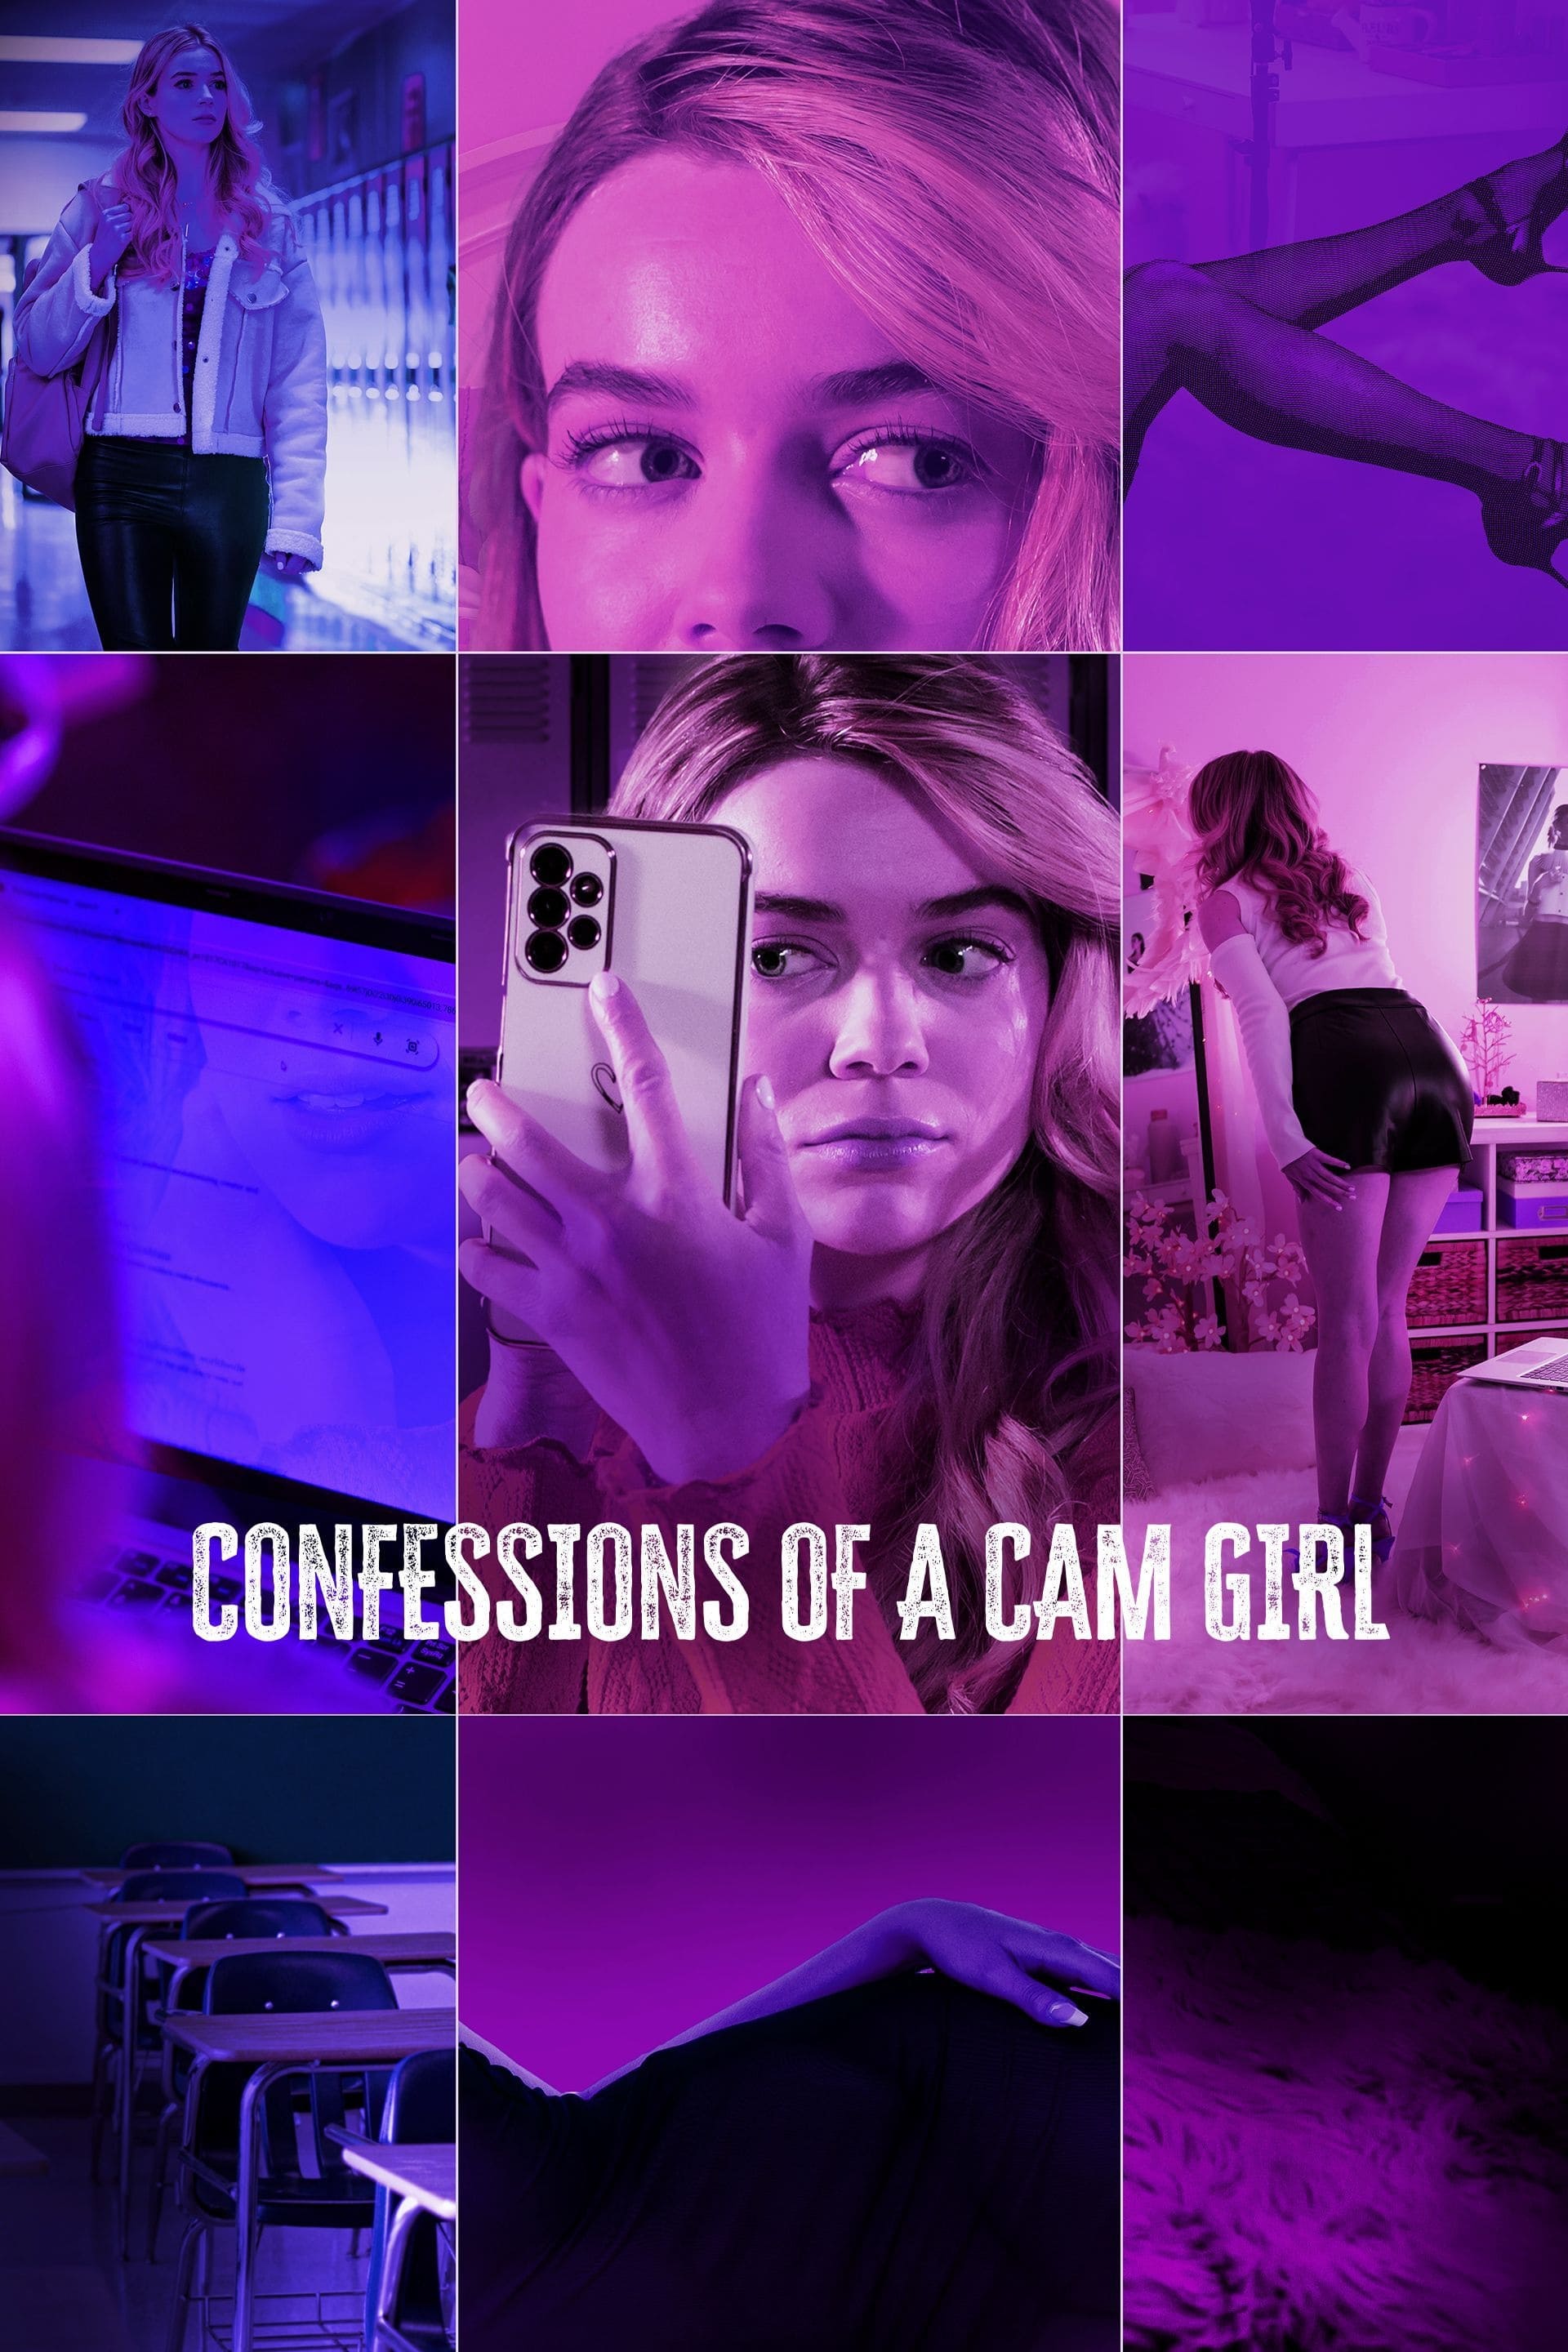 Confessions of a Cam Girl film